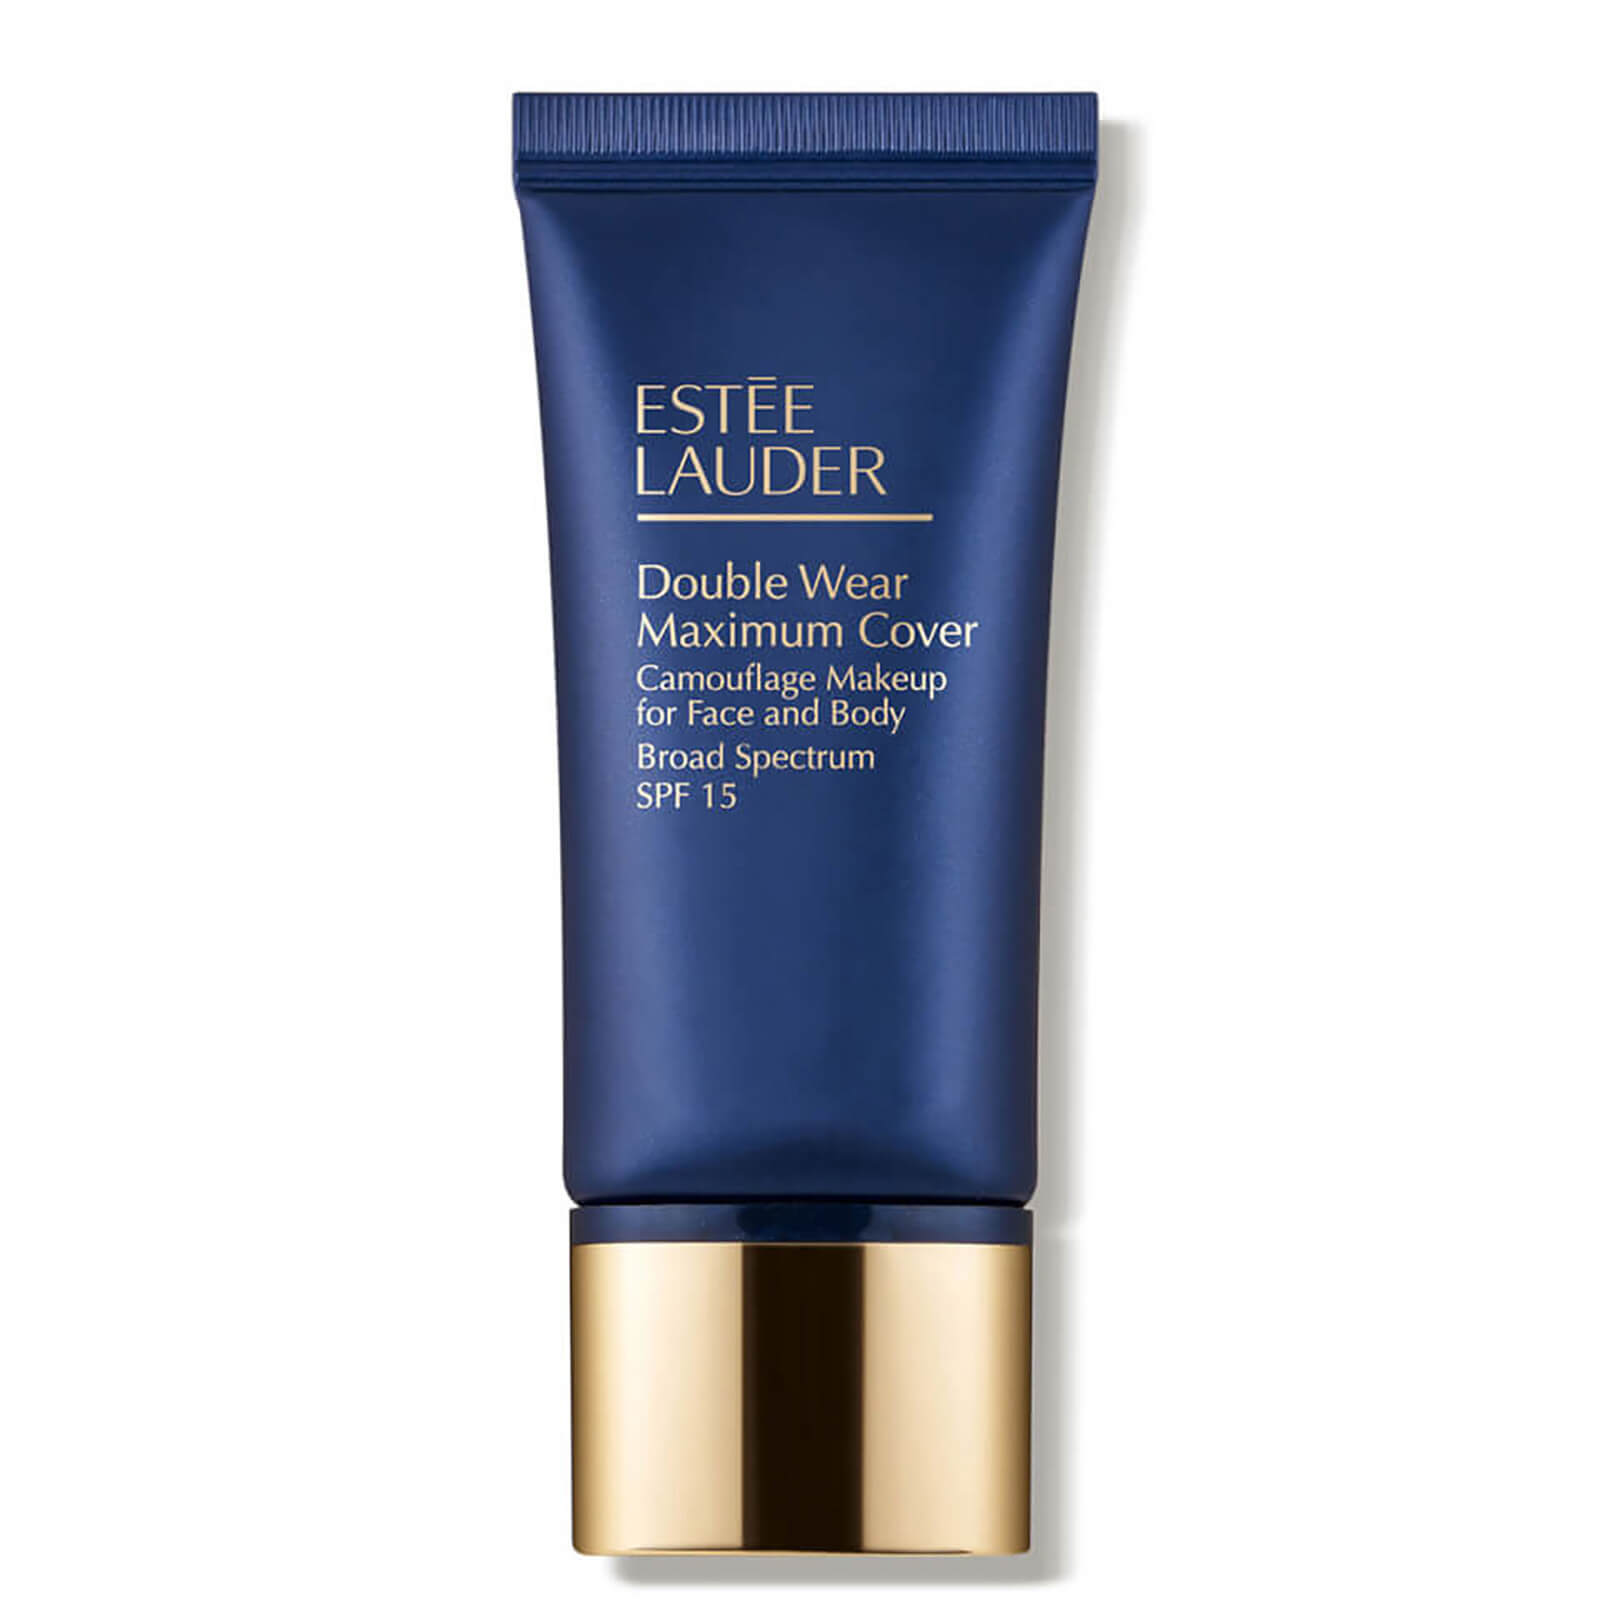 Estee Lauder Double Wear Maximum Cover Camouflage Makeup for Face and Body SPF15 30ml - 1N1 Ivory Nu